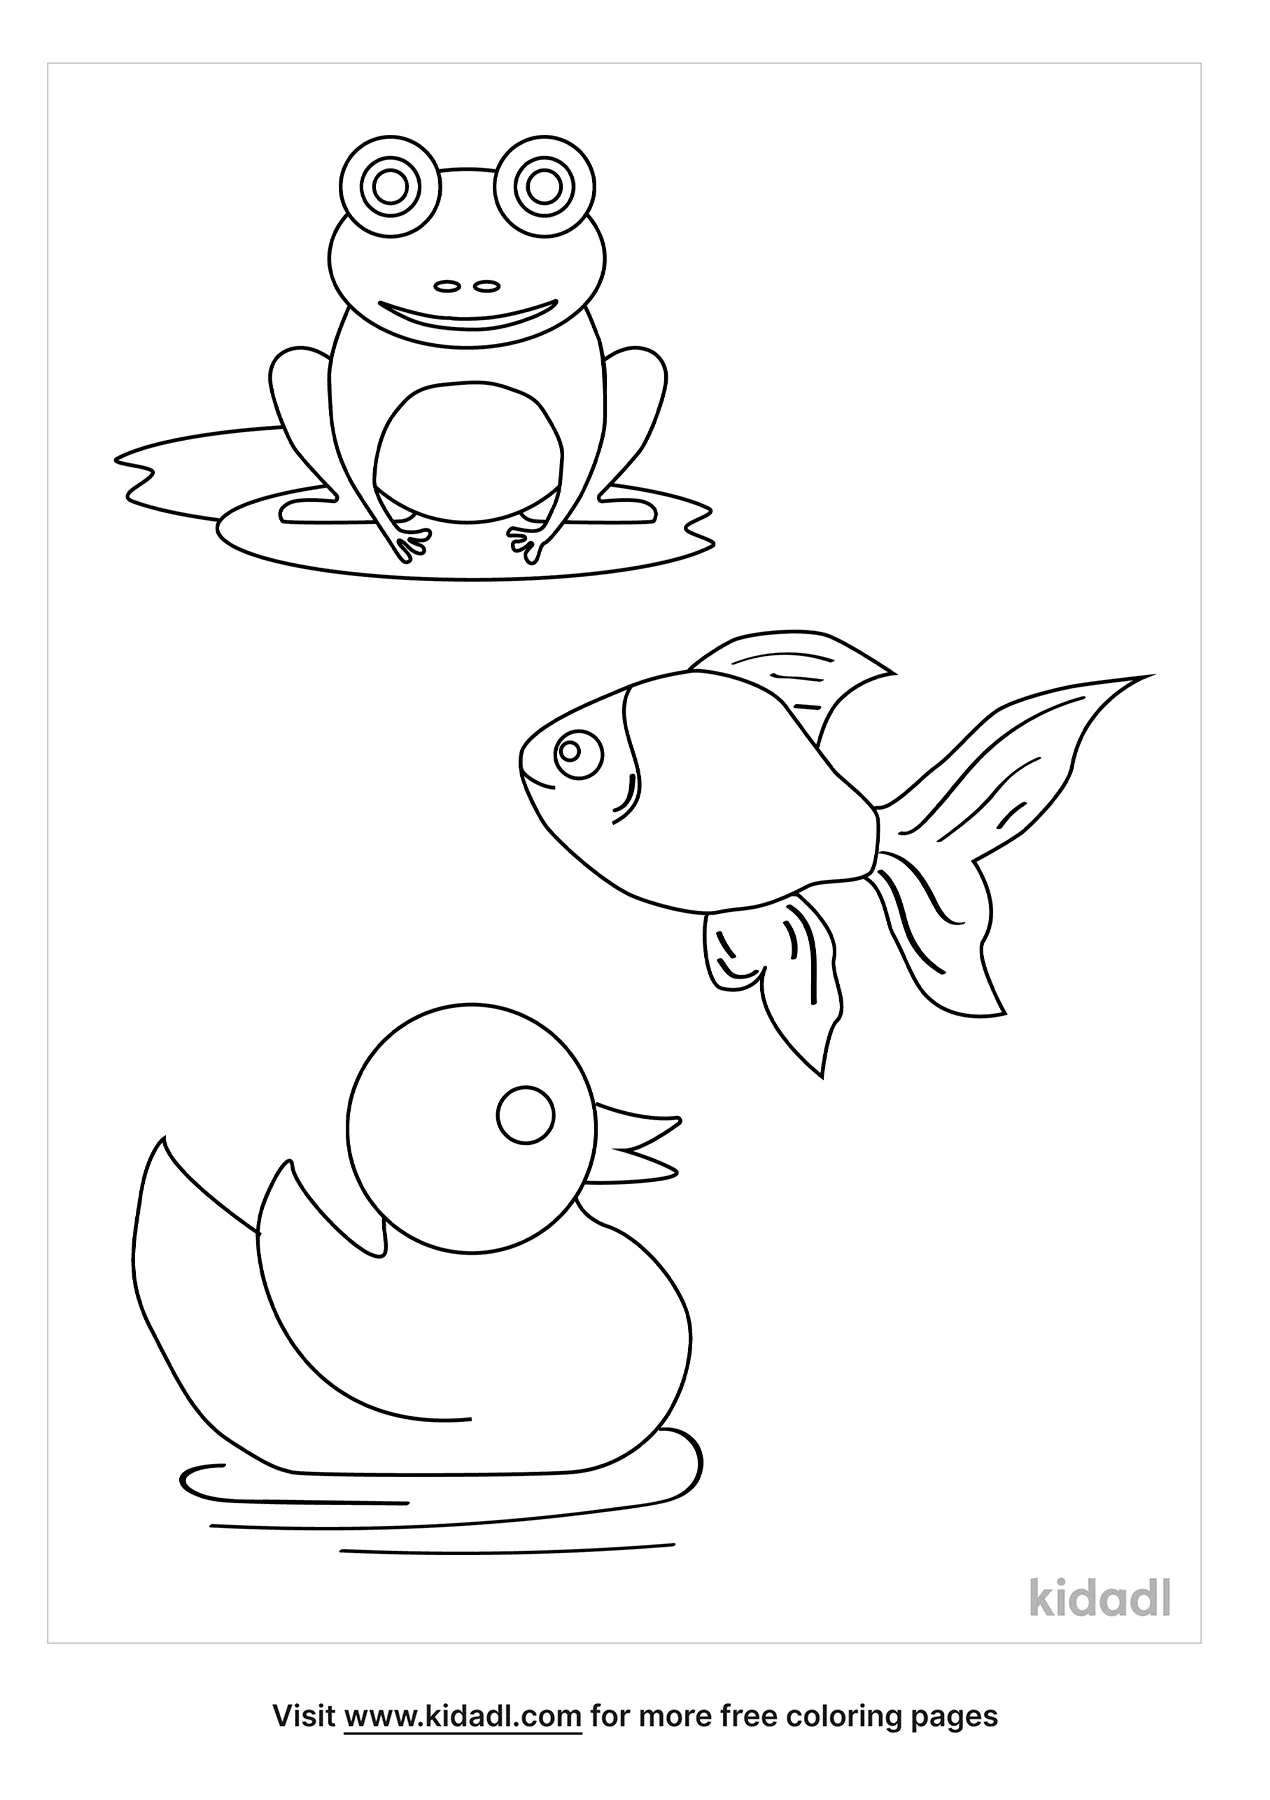 Pond Animals Coloring Page